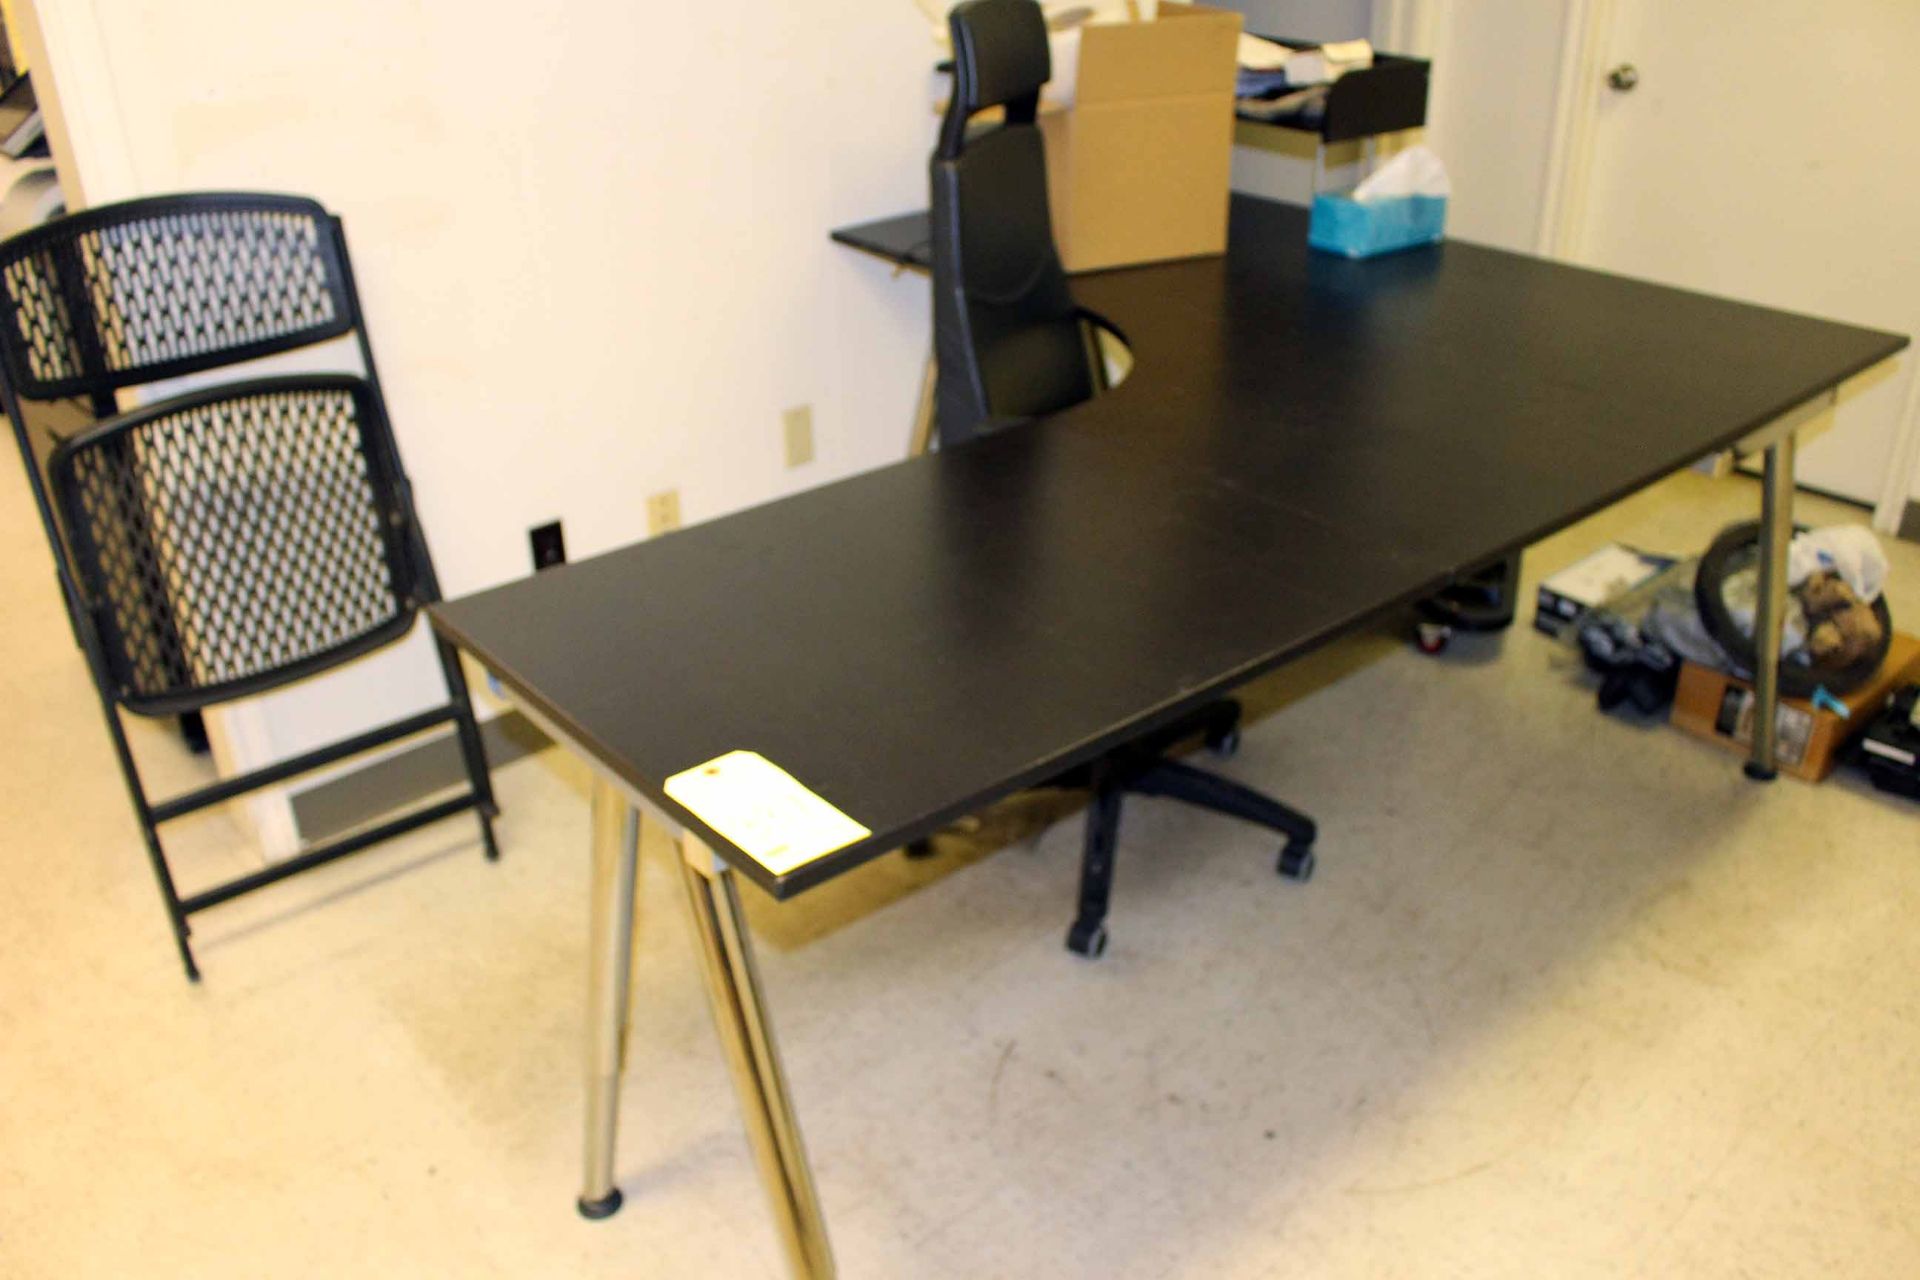 LOT CONSISTING OF: desk, chair